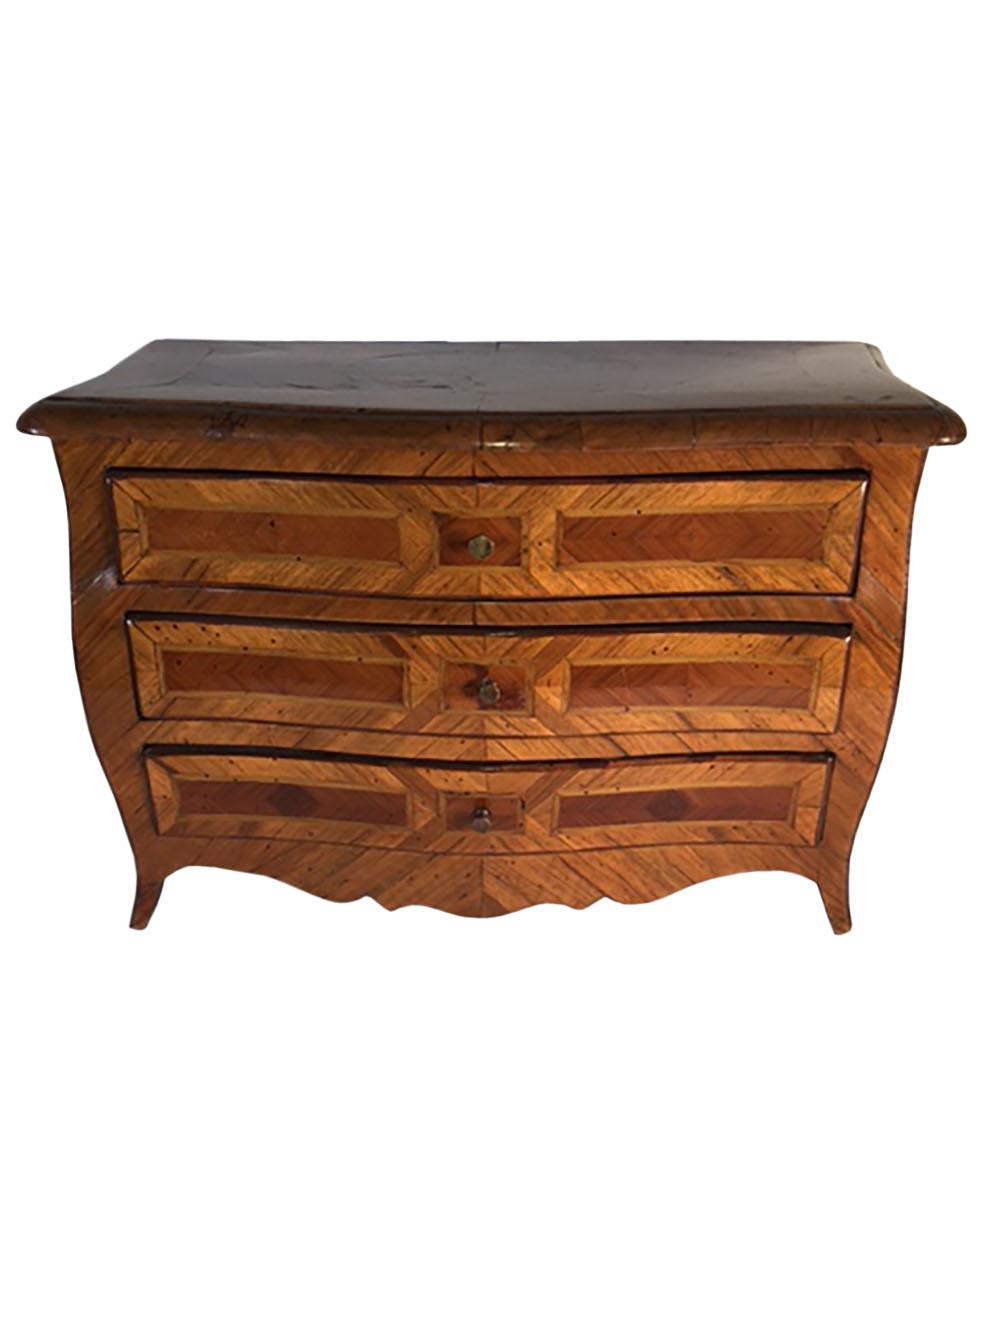 18th Century Italian Minature Table Top Exotic Woods Chest  For Sale 1